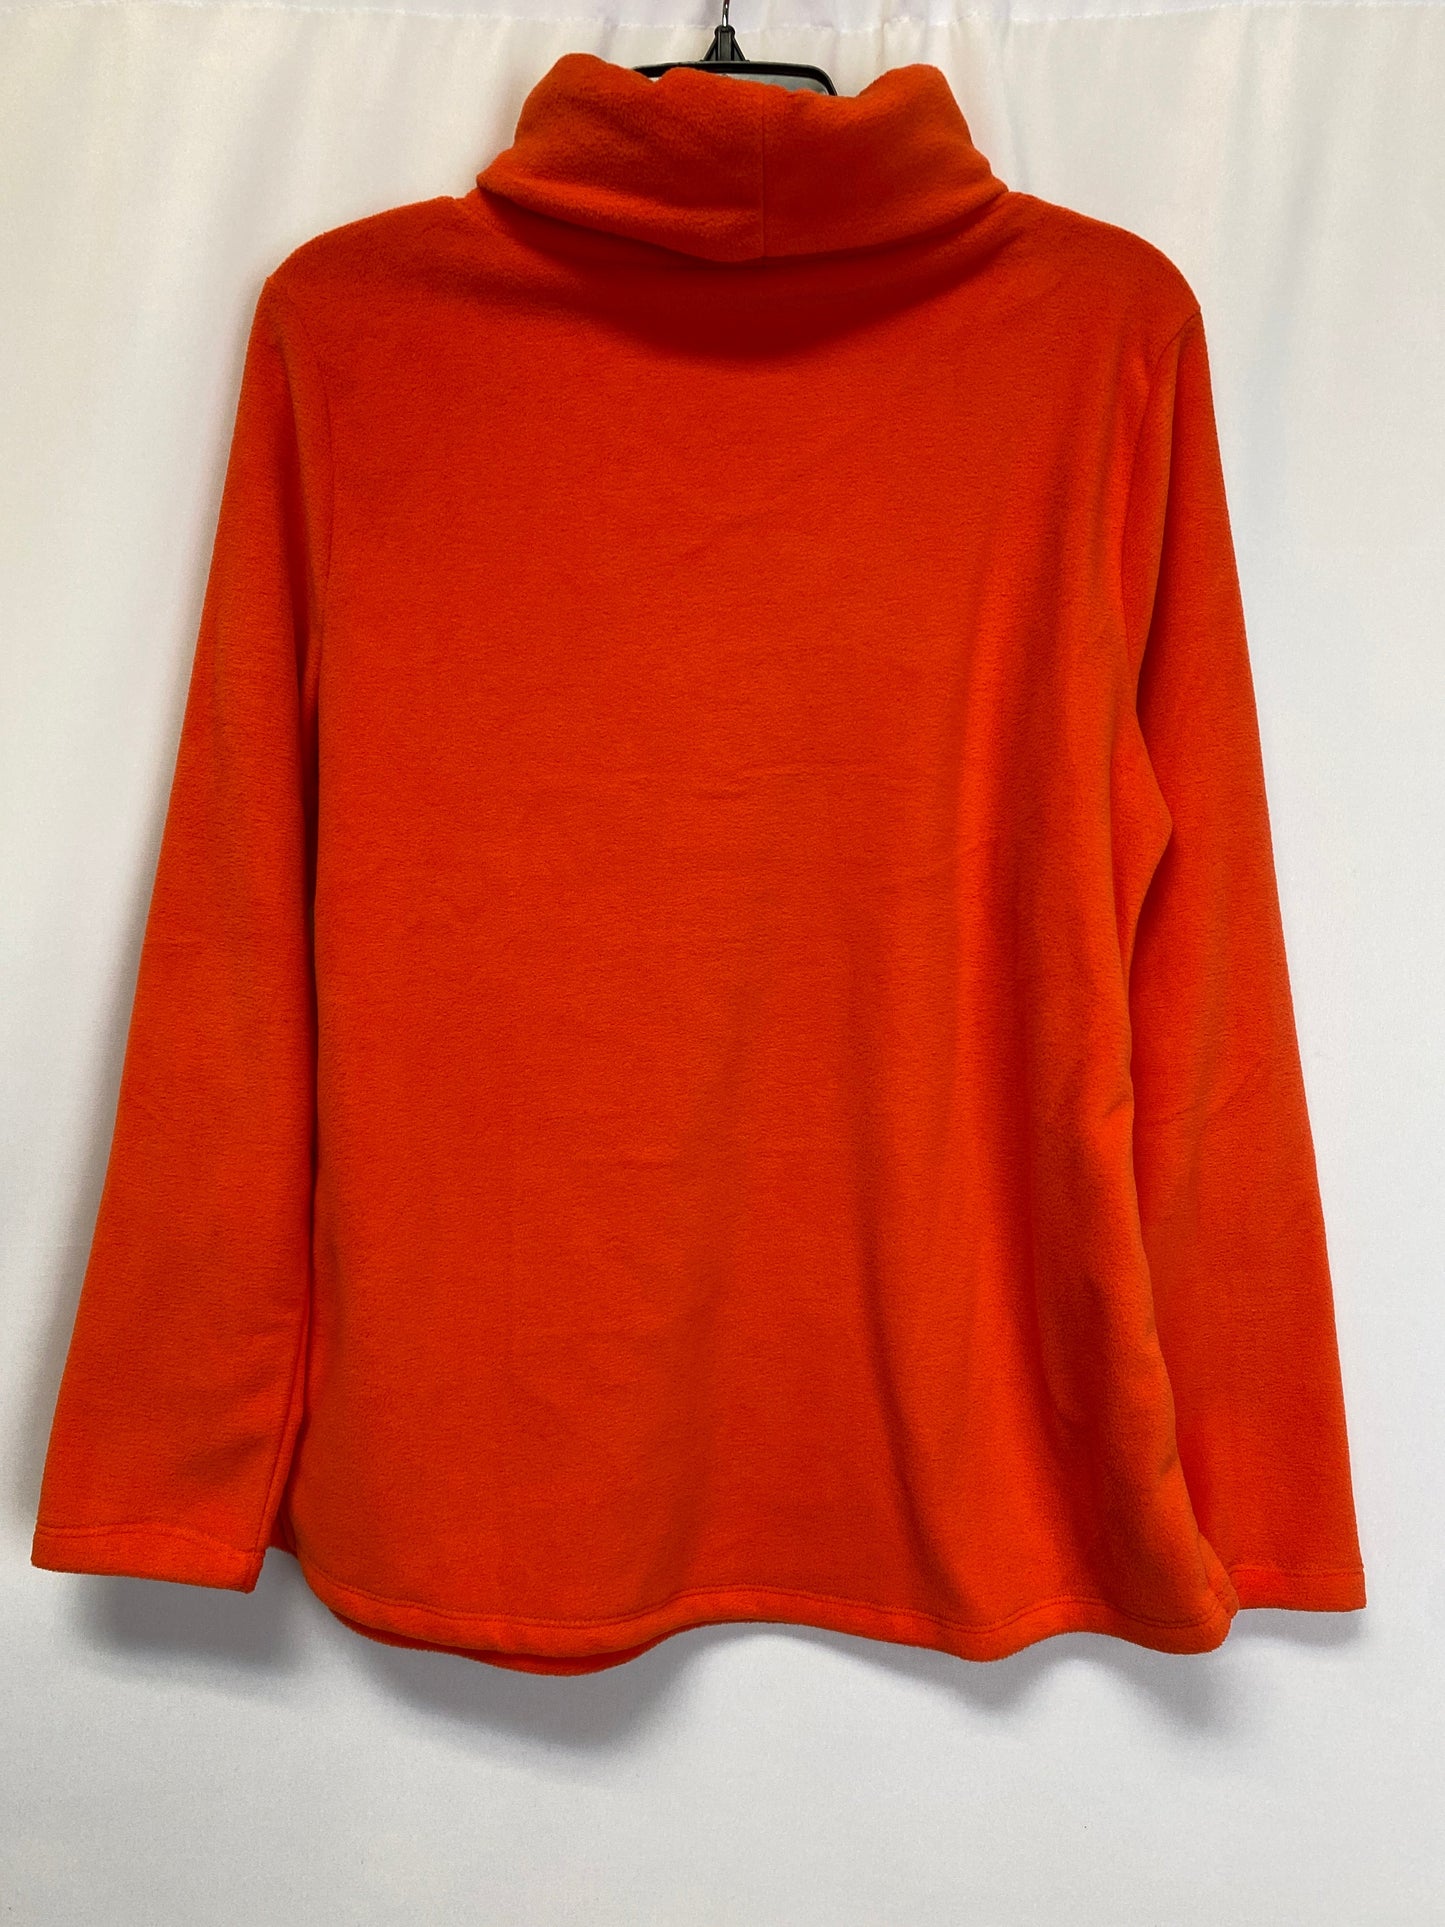 Top Long Sleeve Fleece Pullover By Talbots  Size: M